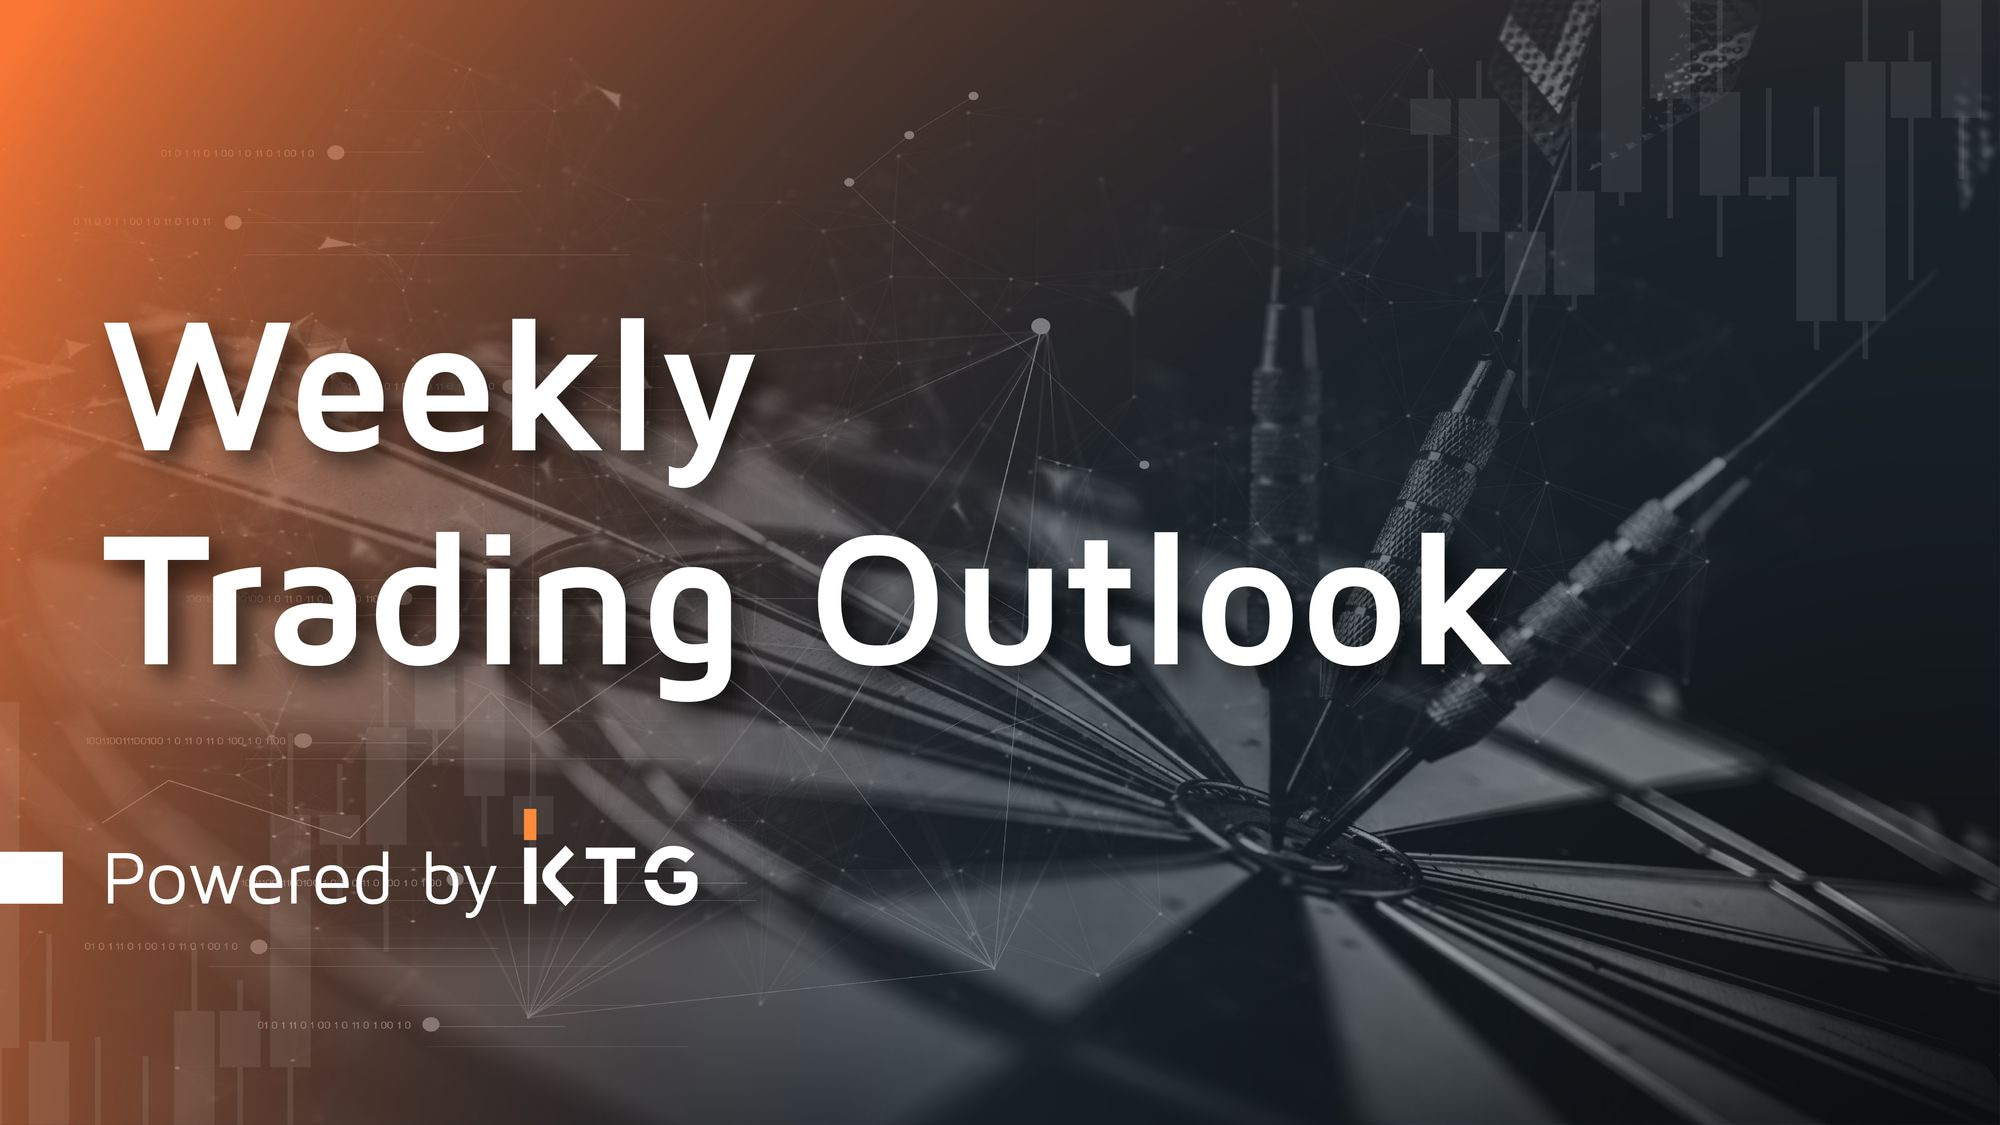 Re-evaluate your biases #TradingOutlook - Powered by KTG